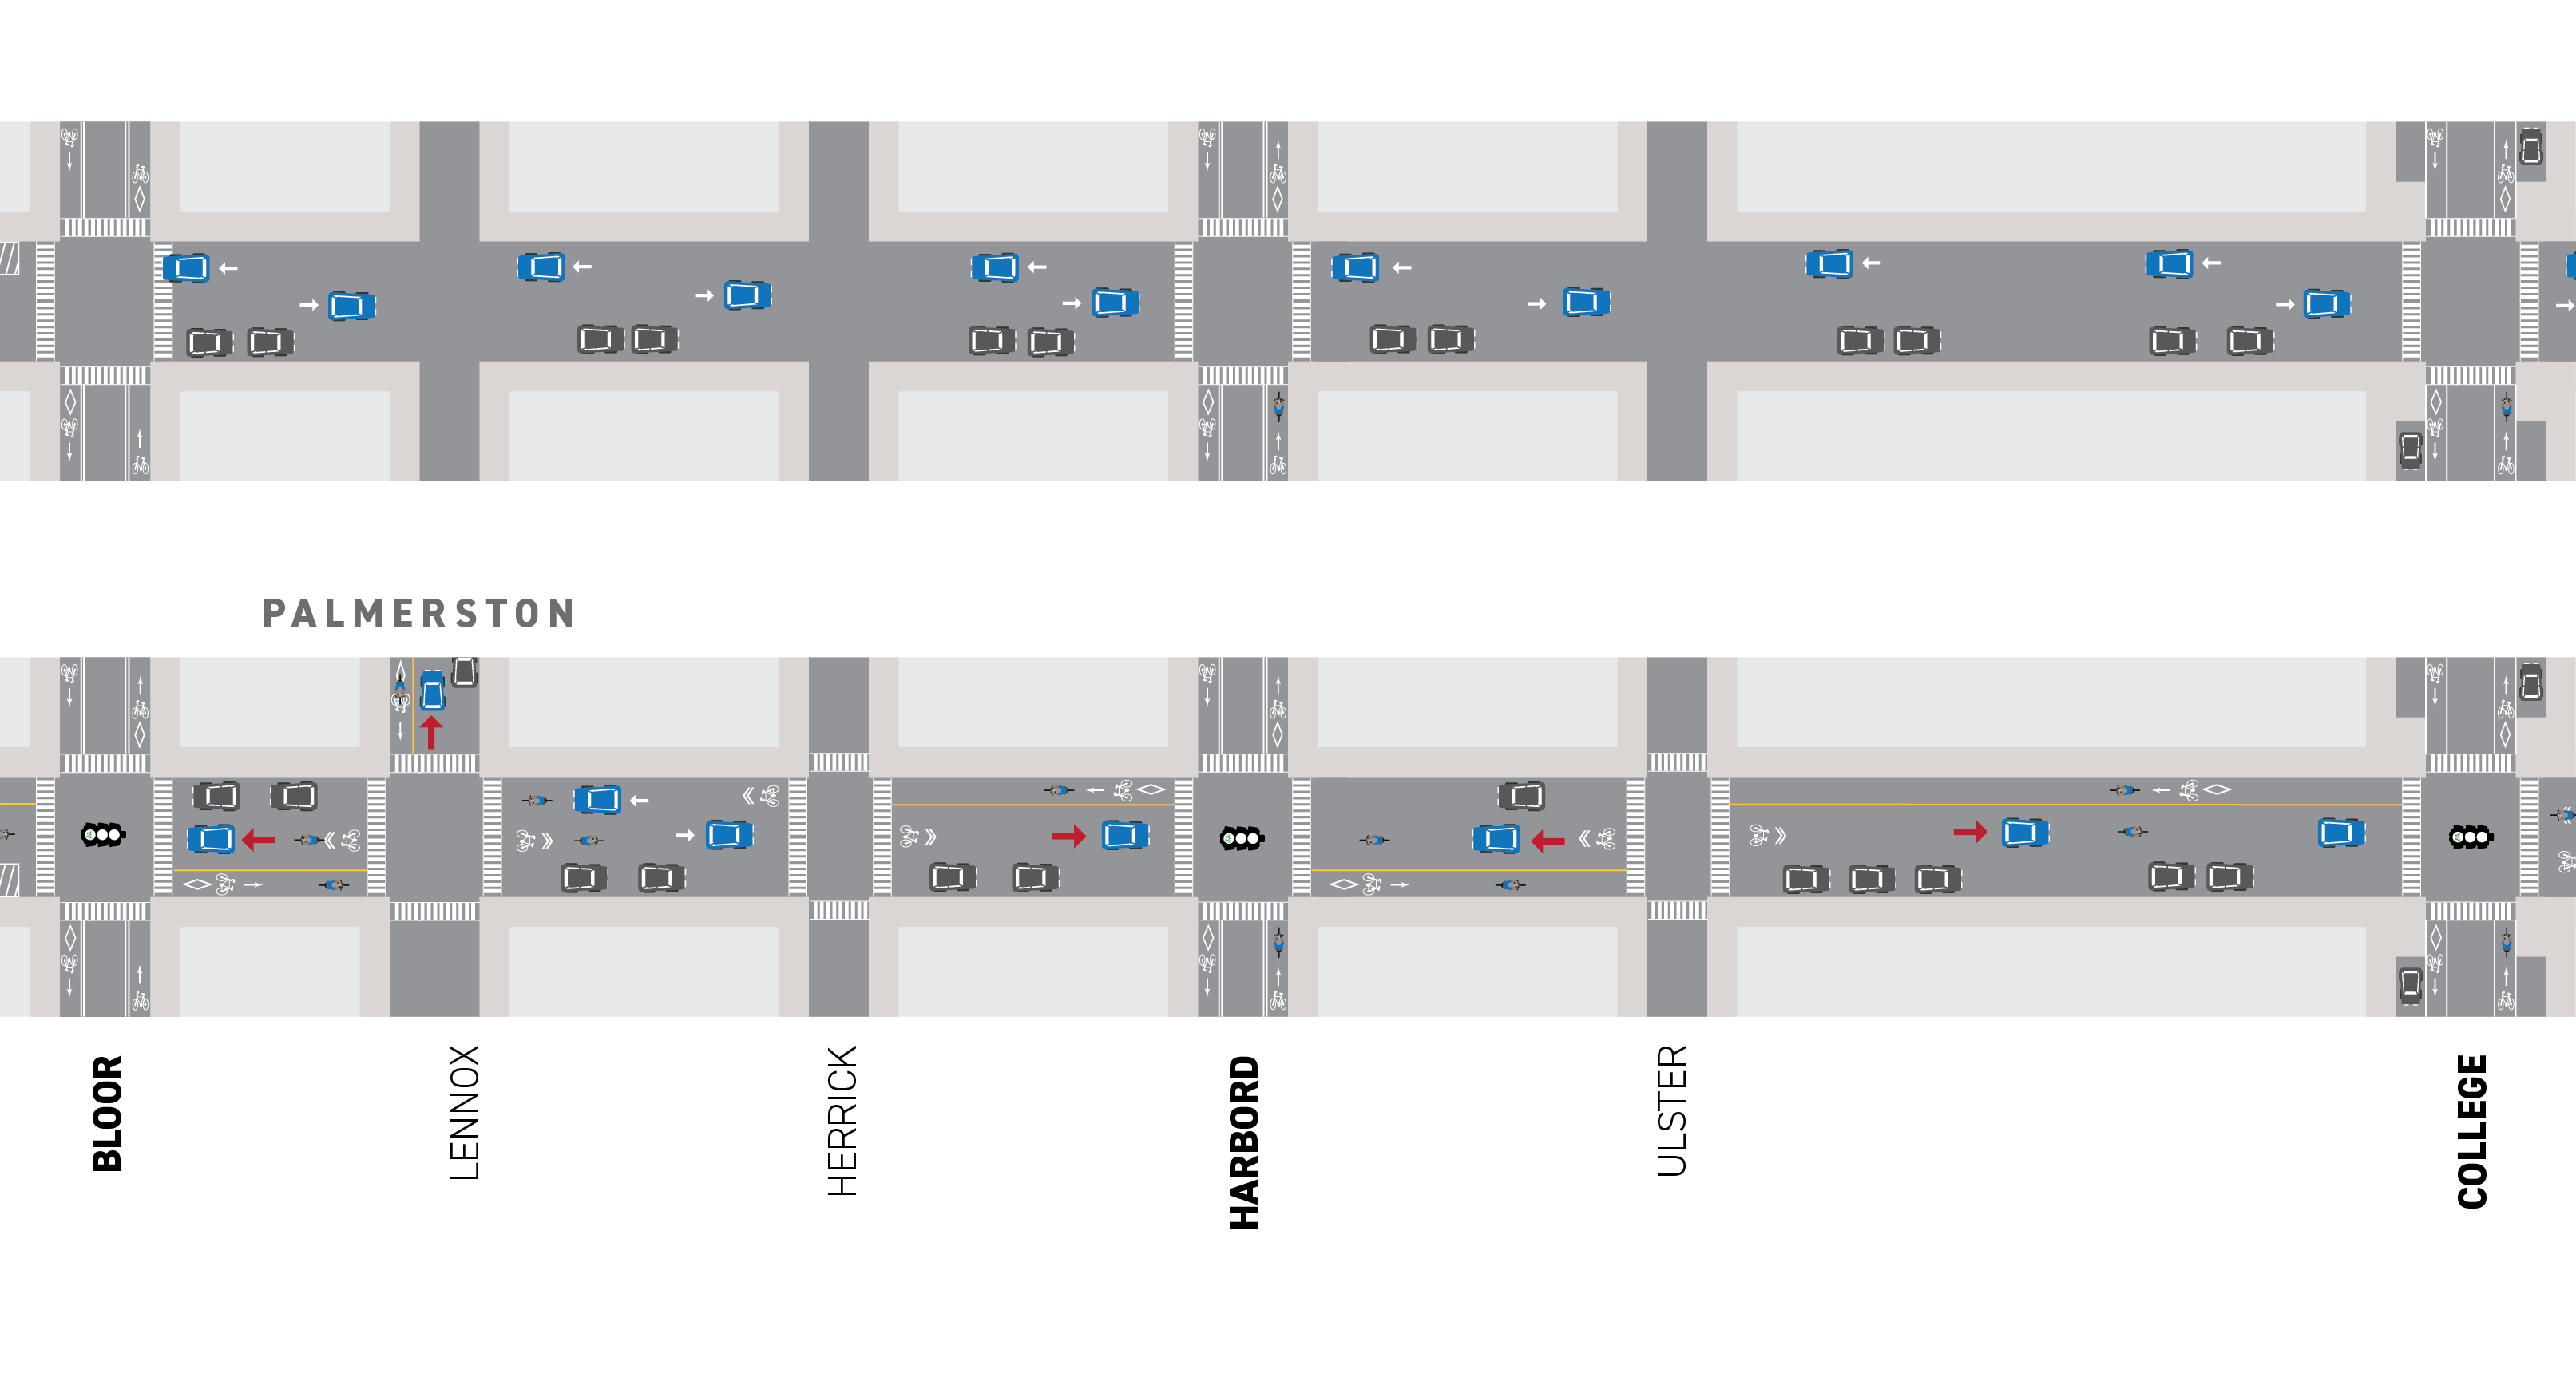 This map represents the existing and planned designs for all road users from Bloor Street to College Street 